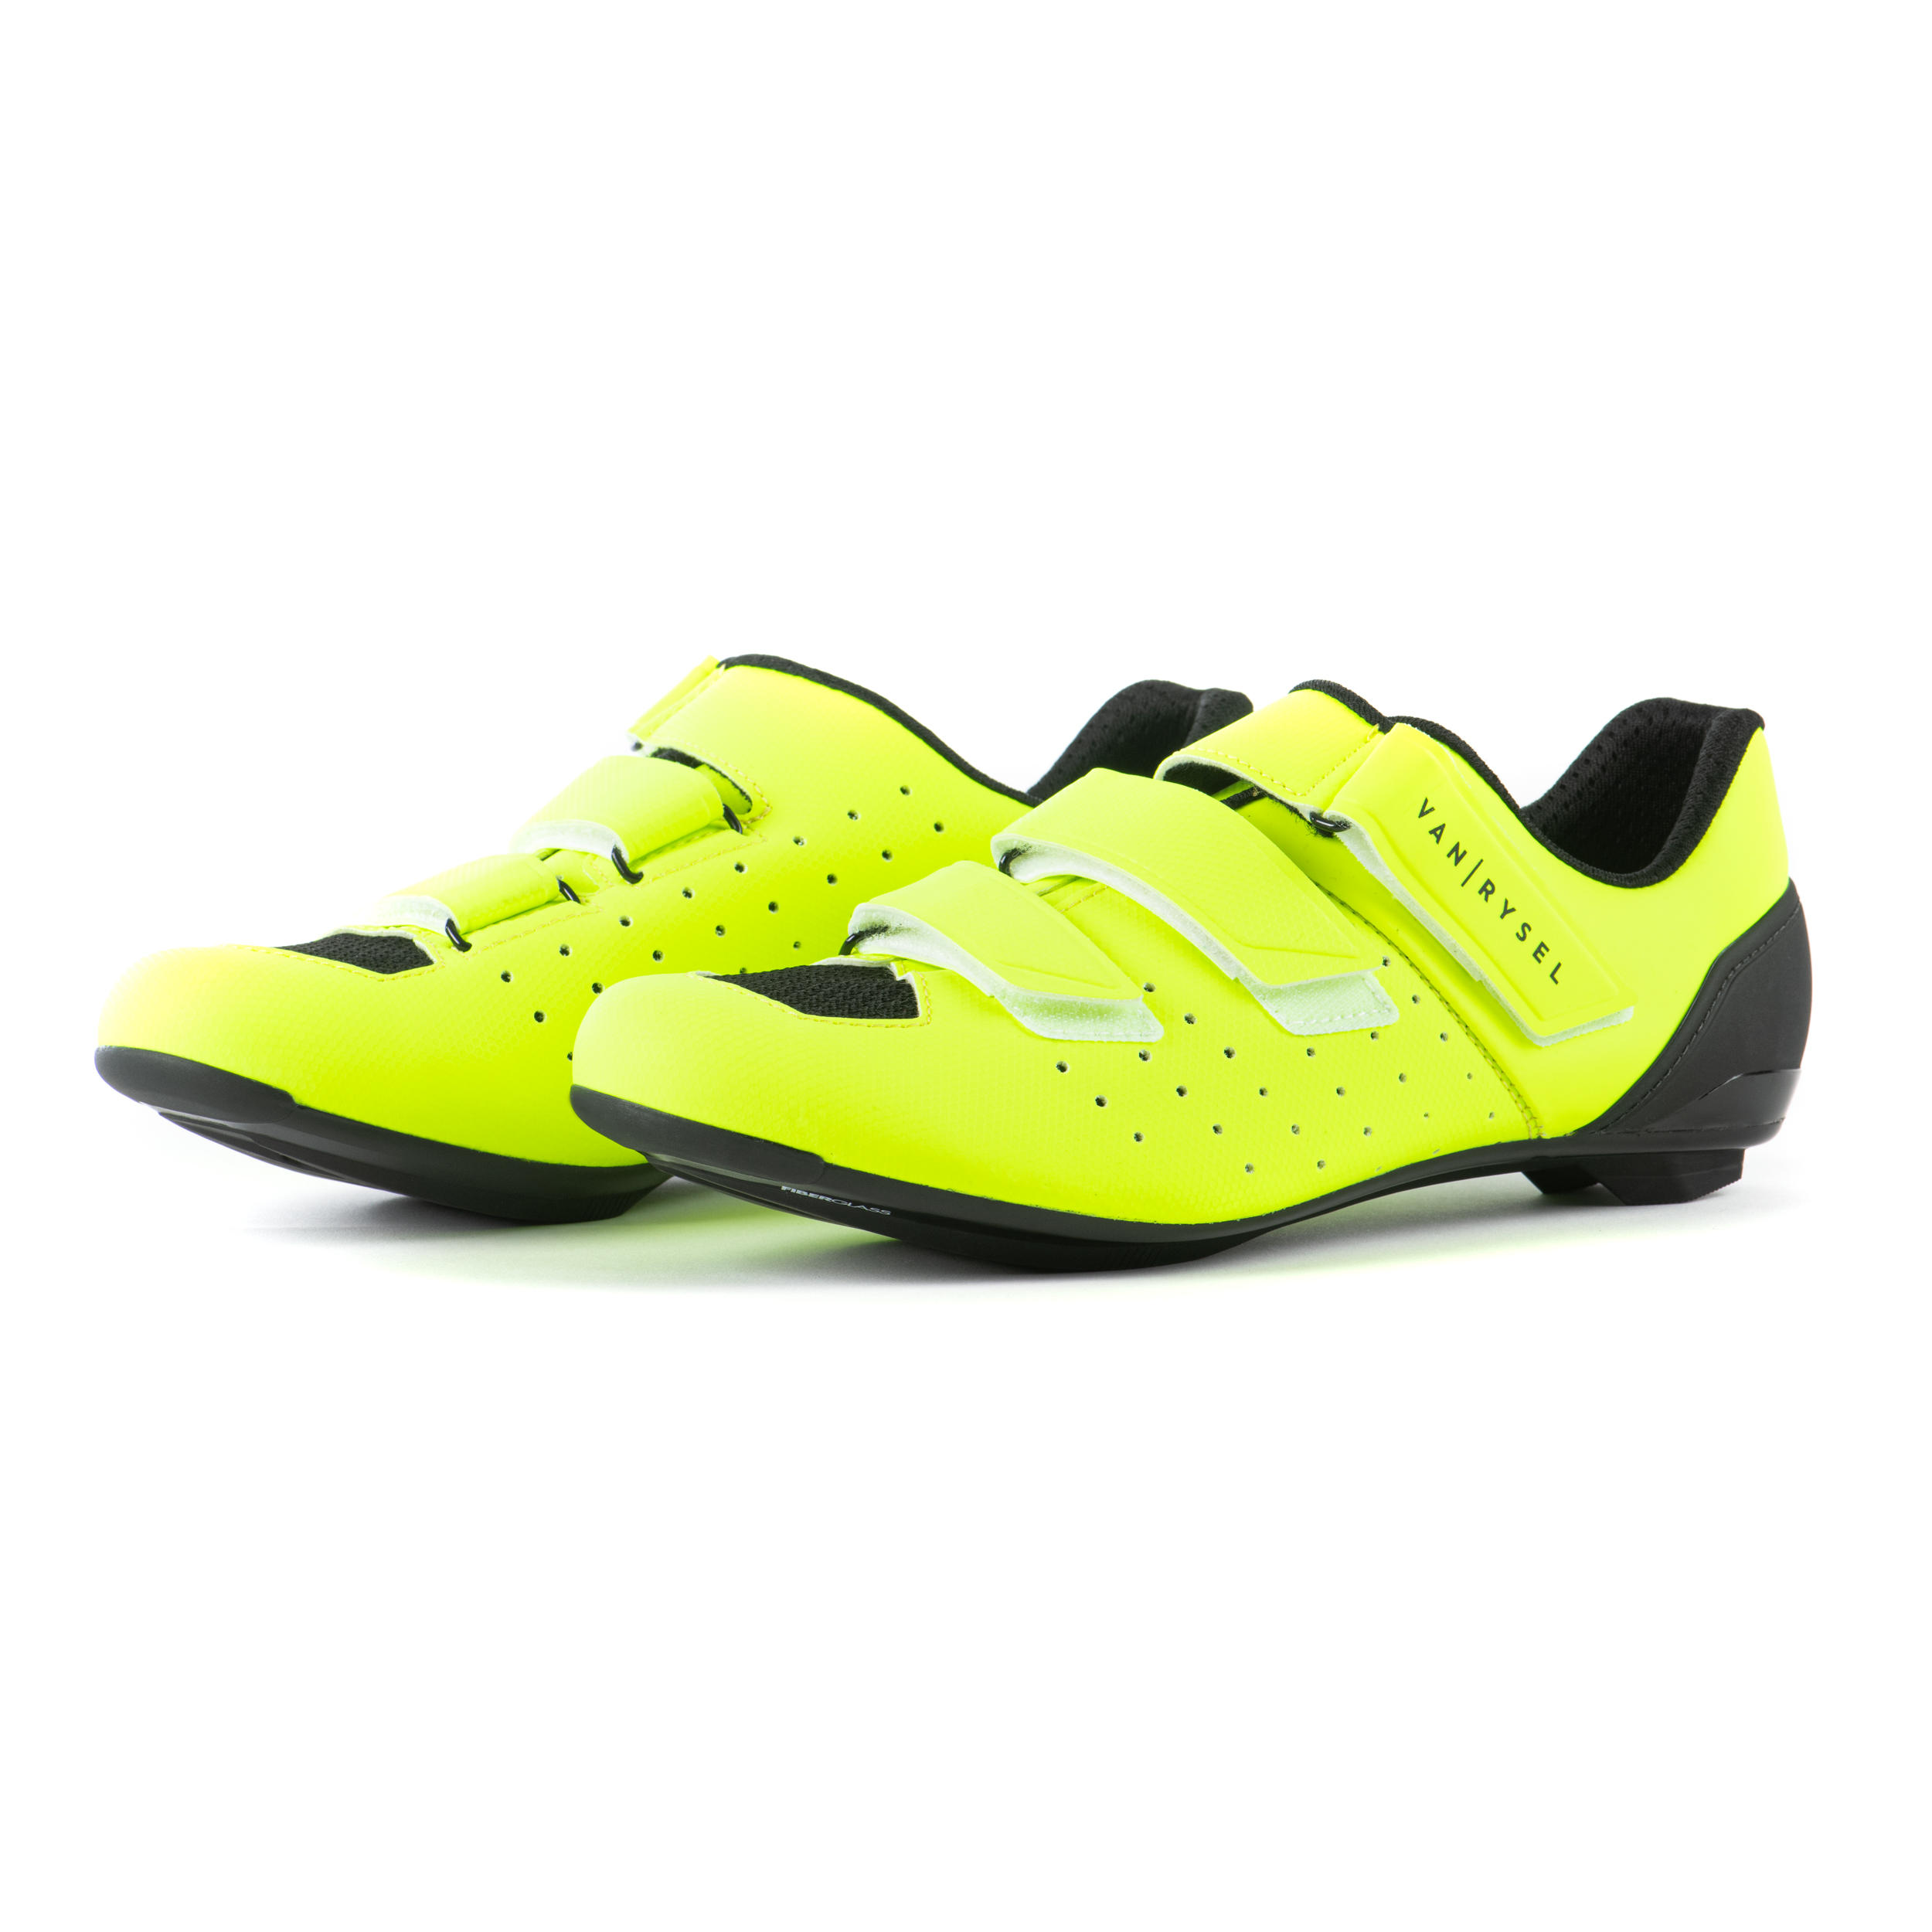 decathlon cycling overshoes